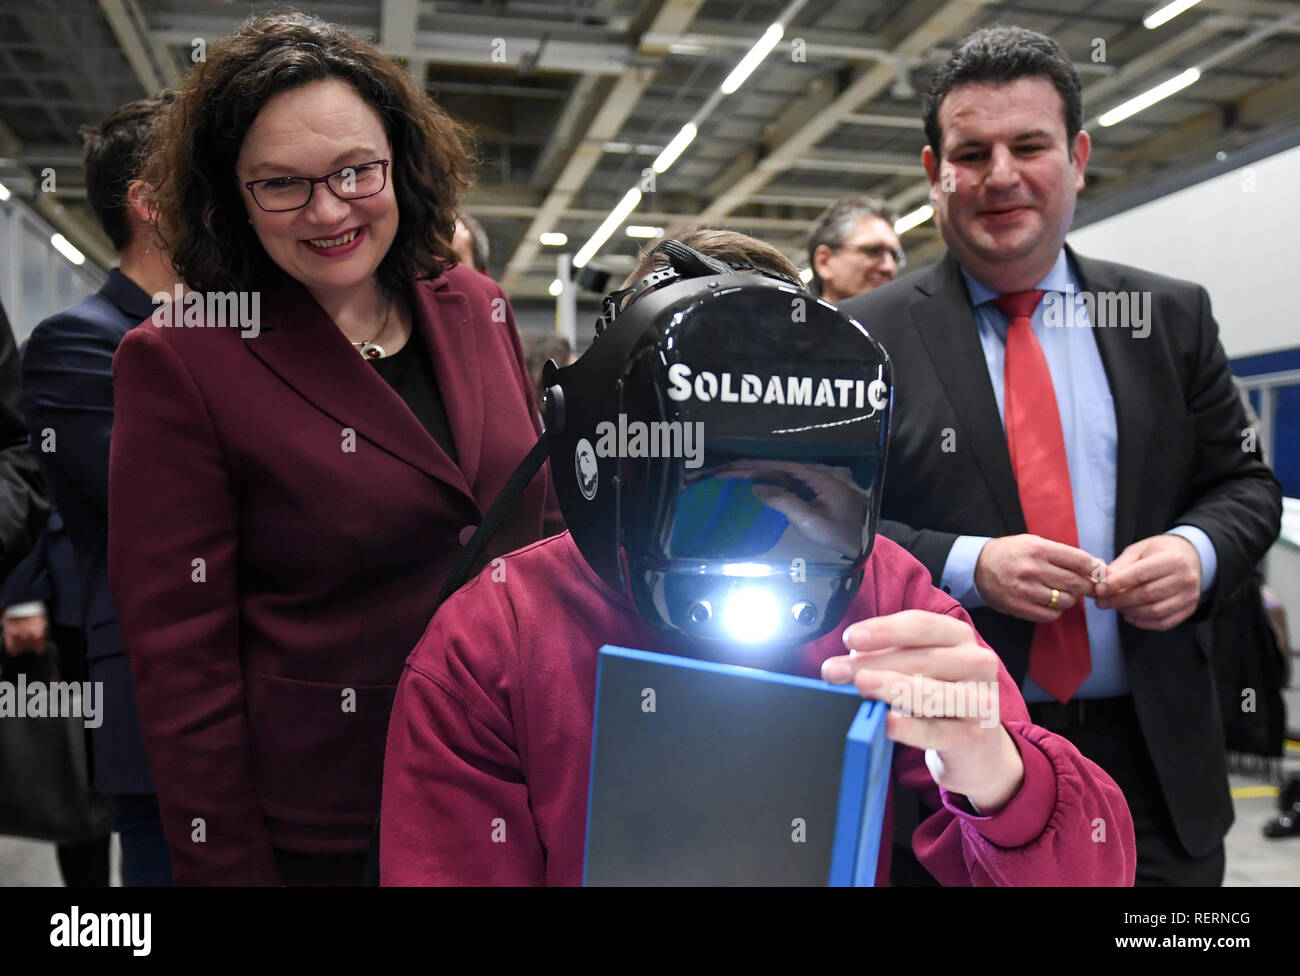 23 January 2019, Saxony, Zwickau: Andrea Nahles, Chairwoman of the SPD, and Hubertus Heil (SPD, r), Federal Minister of Labor, inform themselves about virtual welding at the Volkswagen plant in Zwickau with employee Stephan Brauer. The two politicians were in Zwickau for talks concerning the conversion of the plant into a purely electric vehicle location. With the E-Auto ID, Volkswagen plans to produce the first fully electric series-produced car from November 2019. Photo: Hendrik Schmidt/dpa-Zentralbild/dpa Stock Photo